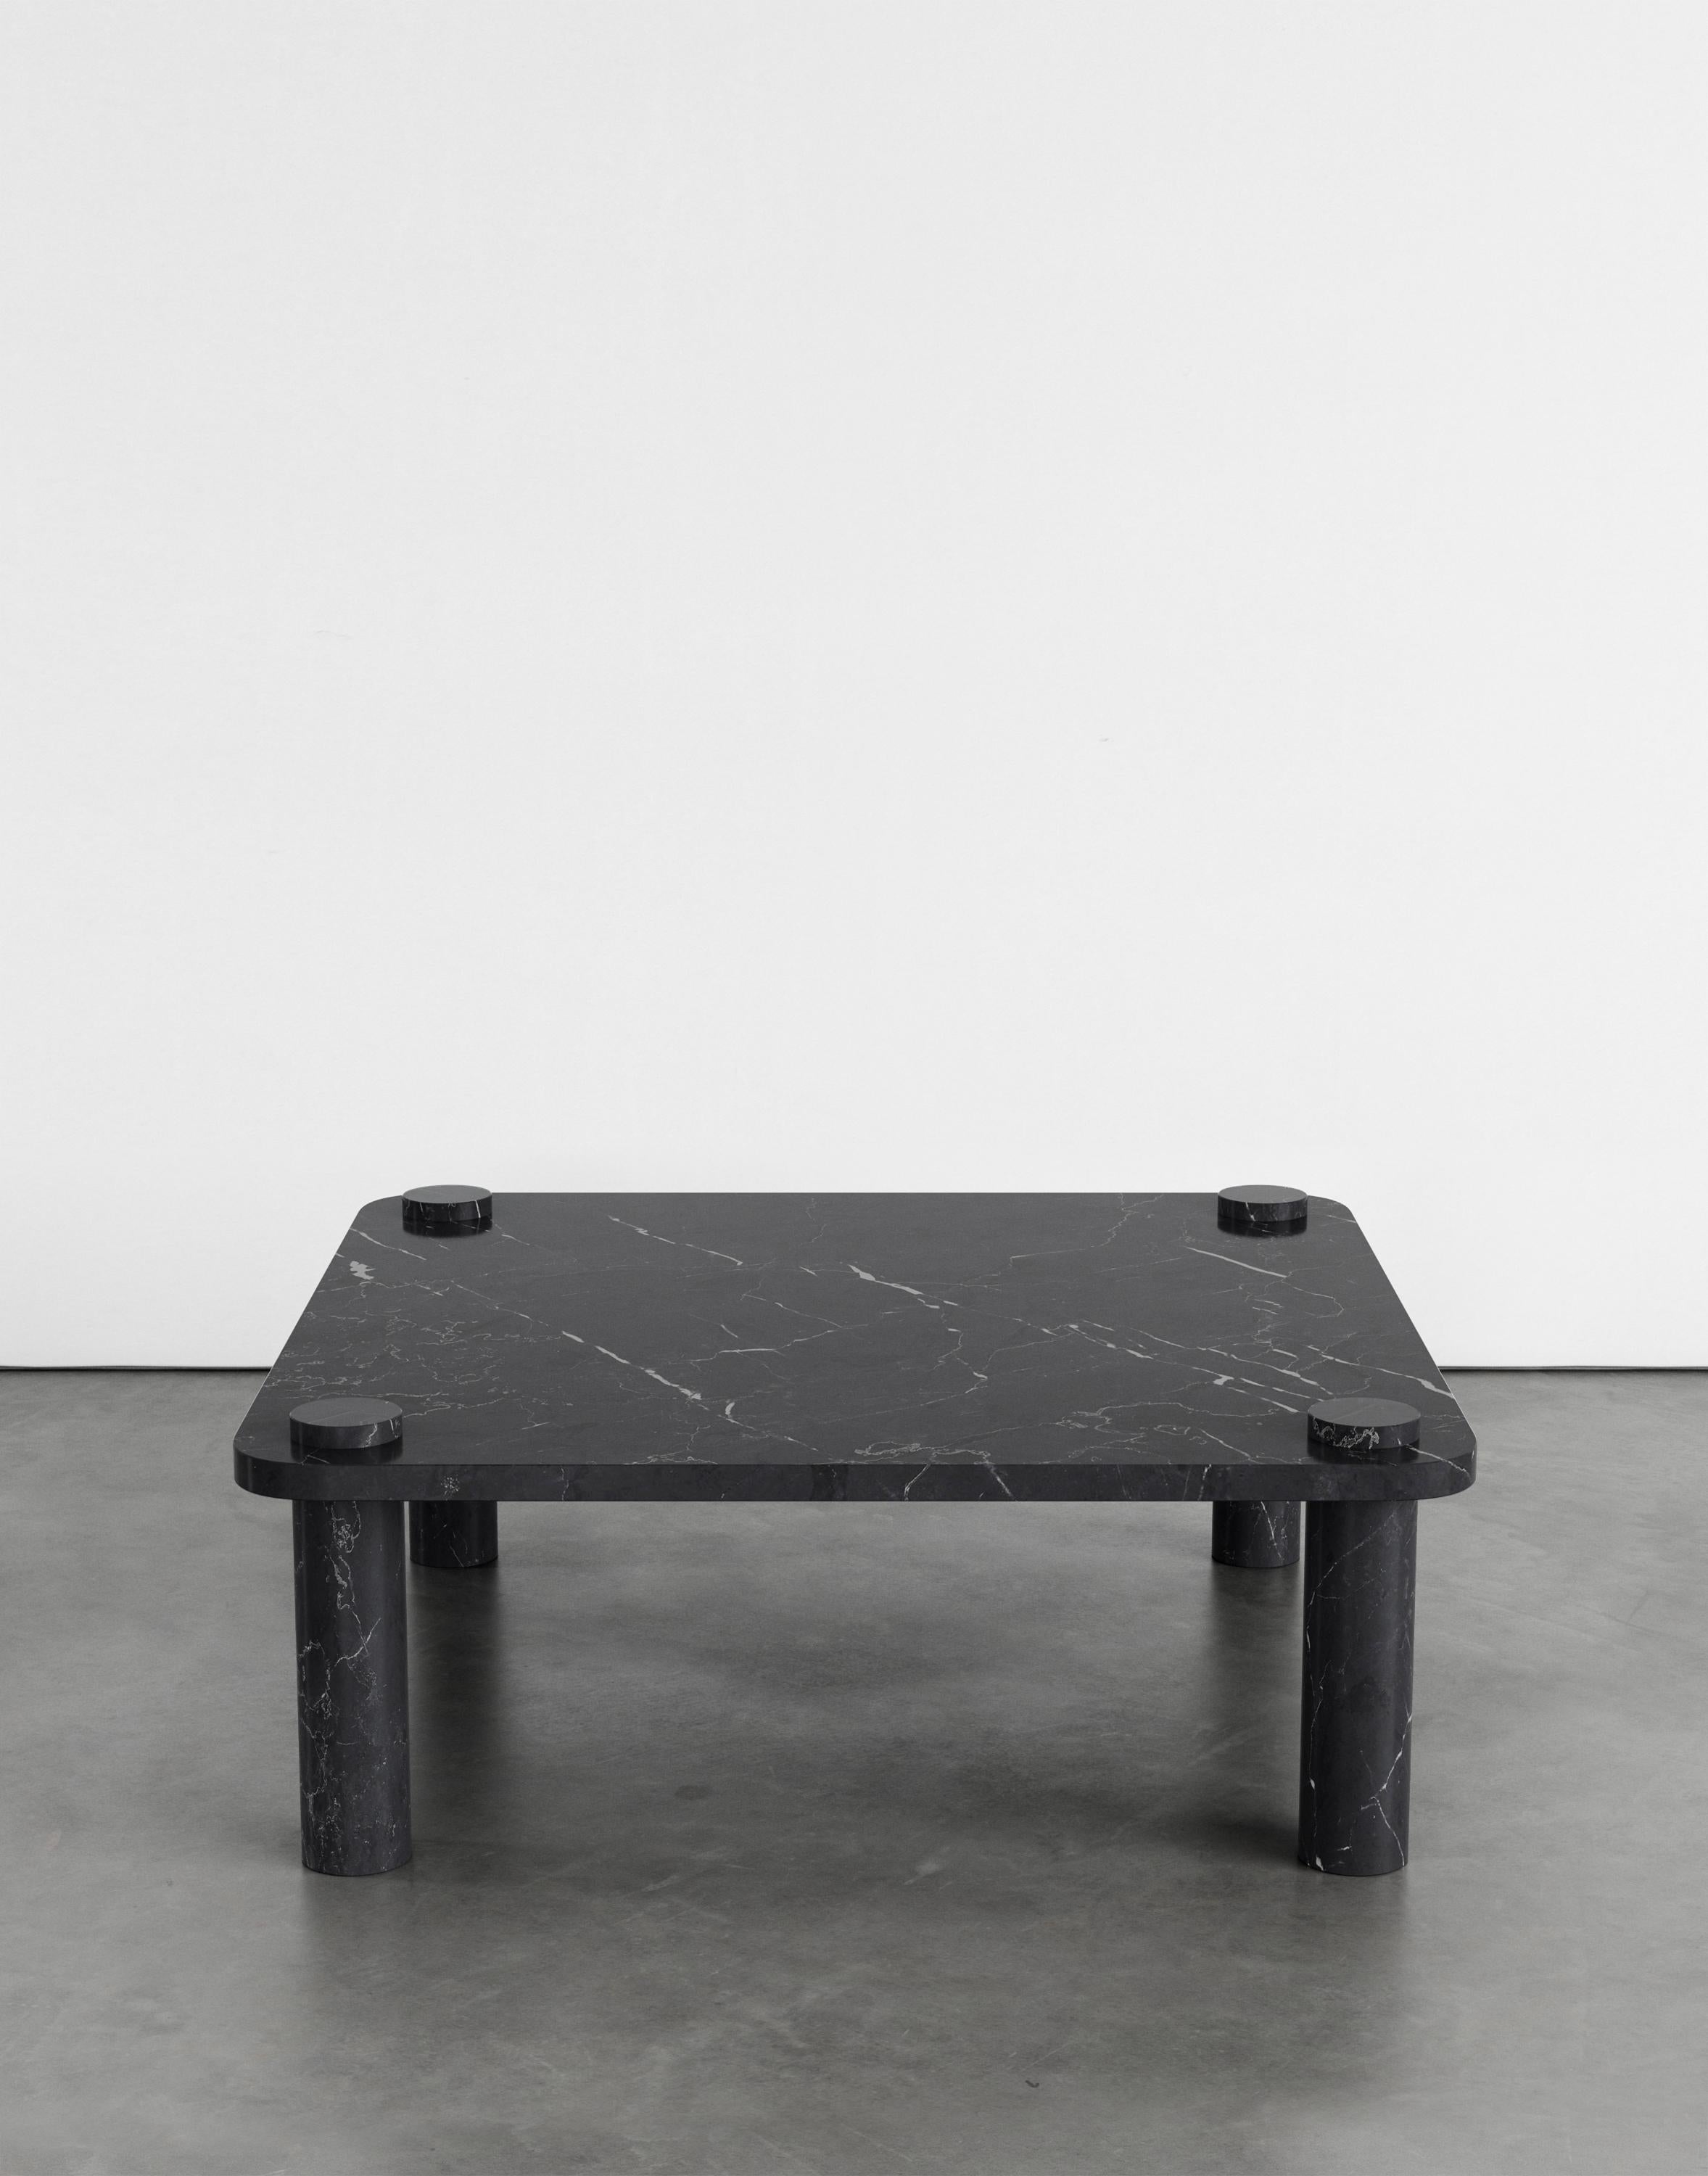 Simone 100 coffee table by Agglomerati.
Dimensions: D 100 x W 100 x H 36 cm.
Materials: Black Marquina. Available in other stones. 

Agglomerati is a London-based studio creating distinctive stone furniture. Established in 2019 by Australian